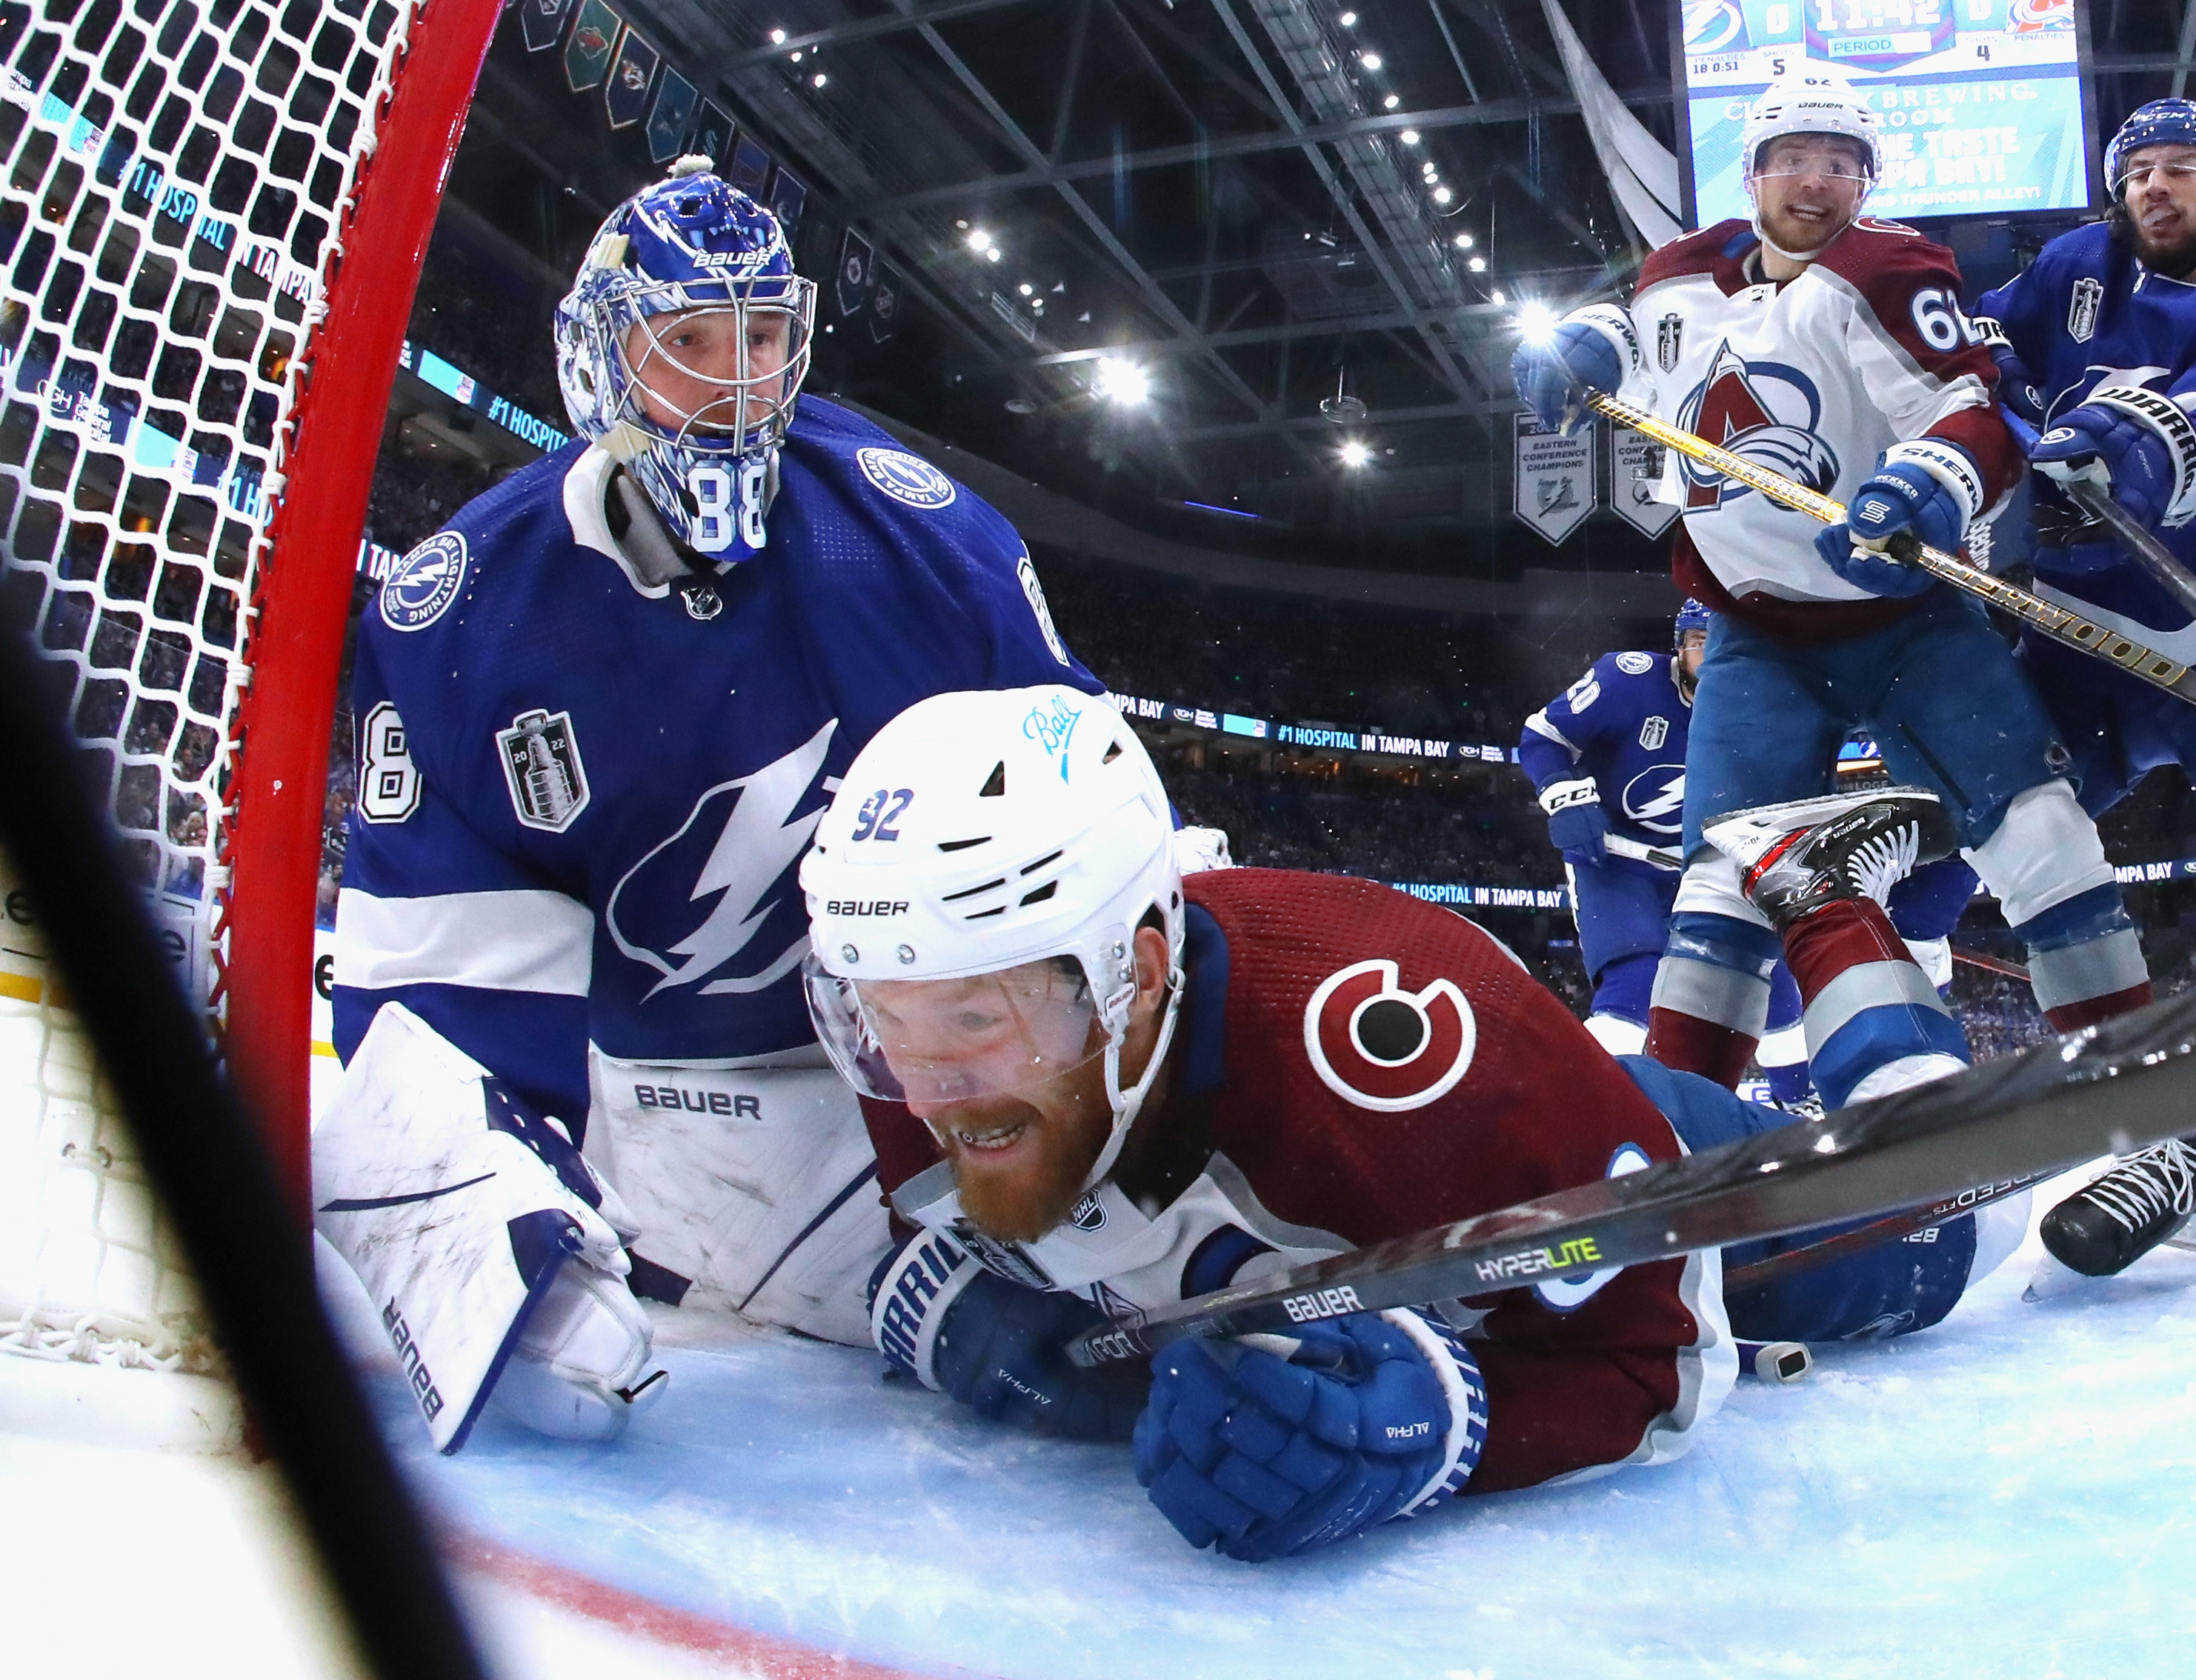 Gabriel Landeskog #92 of the Colorado Avalanche gets tangled up with Andrei Vasilevskiy #88 of the Tampa Bay Lightning during Game 3 of the 2022 NHL Stanley Cup Final at Amalie Arena on June 20, 2022 in Tampa, Florida.